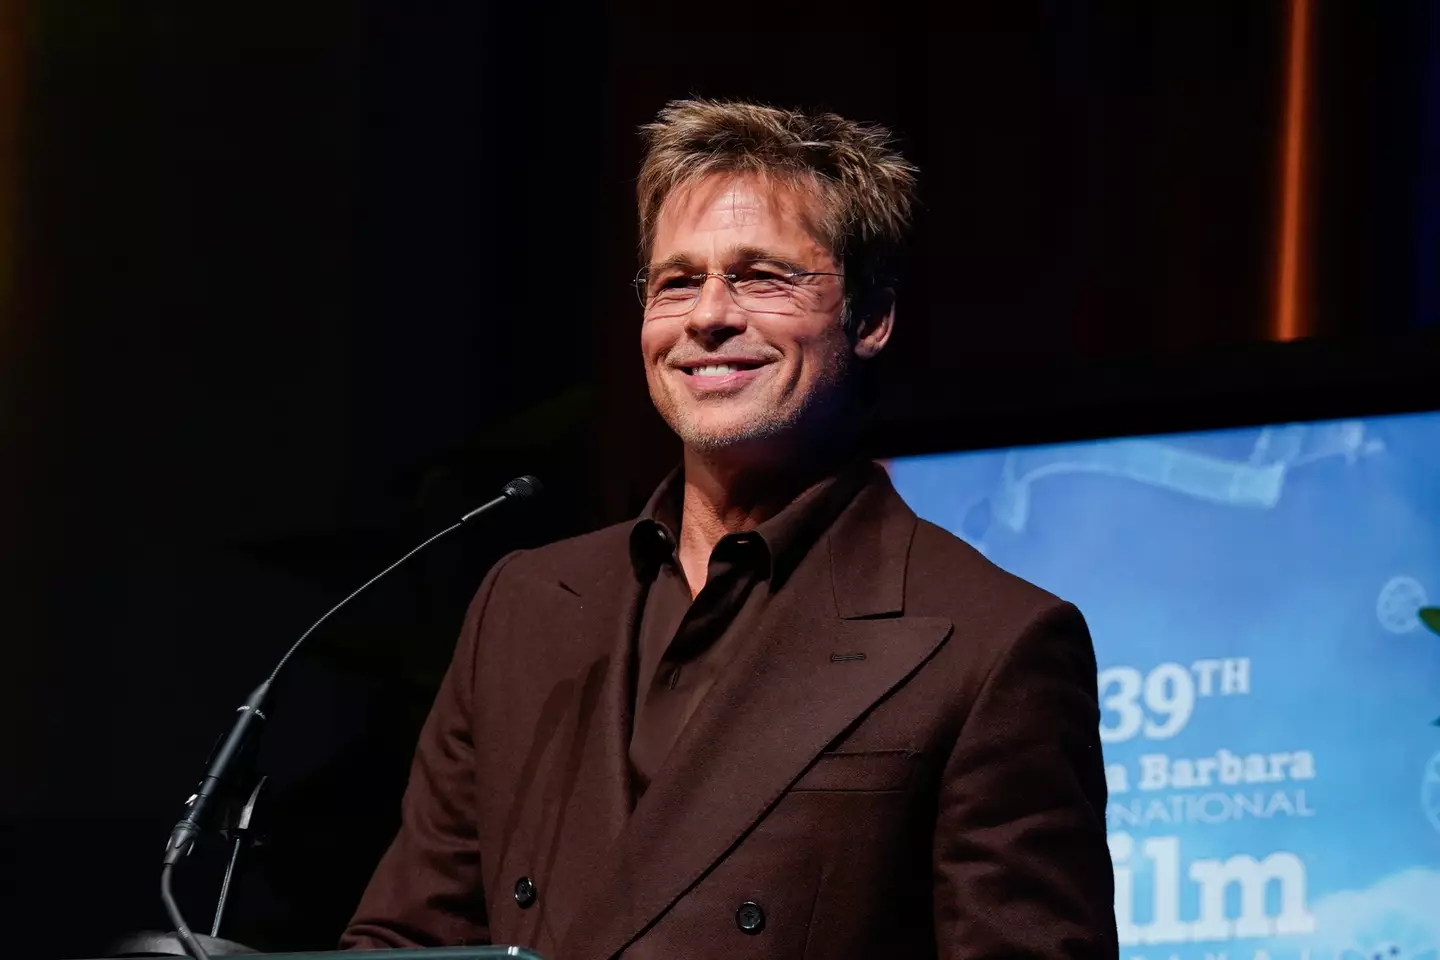 Brad Pitt previously spoke about his favorite actor. (Presley Ann/Getty Images for DAOU Family Estates)